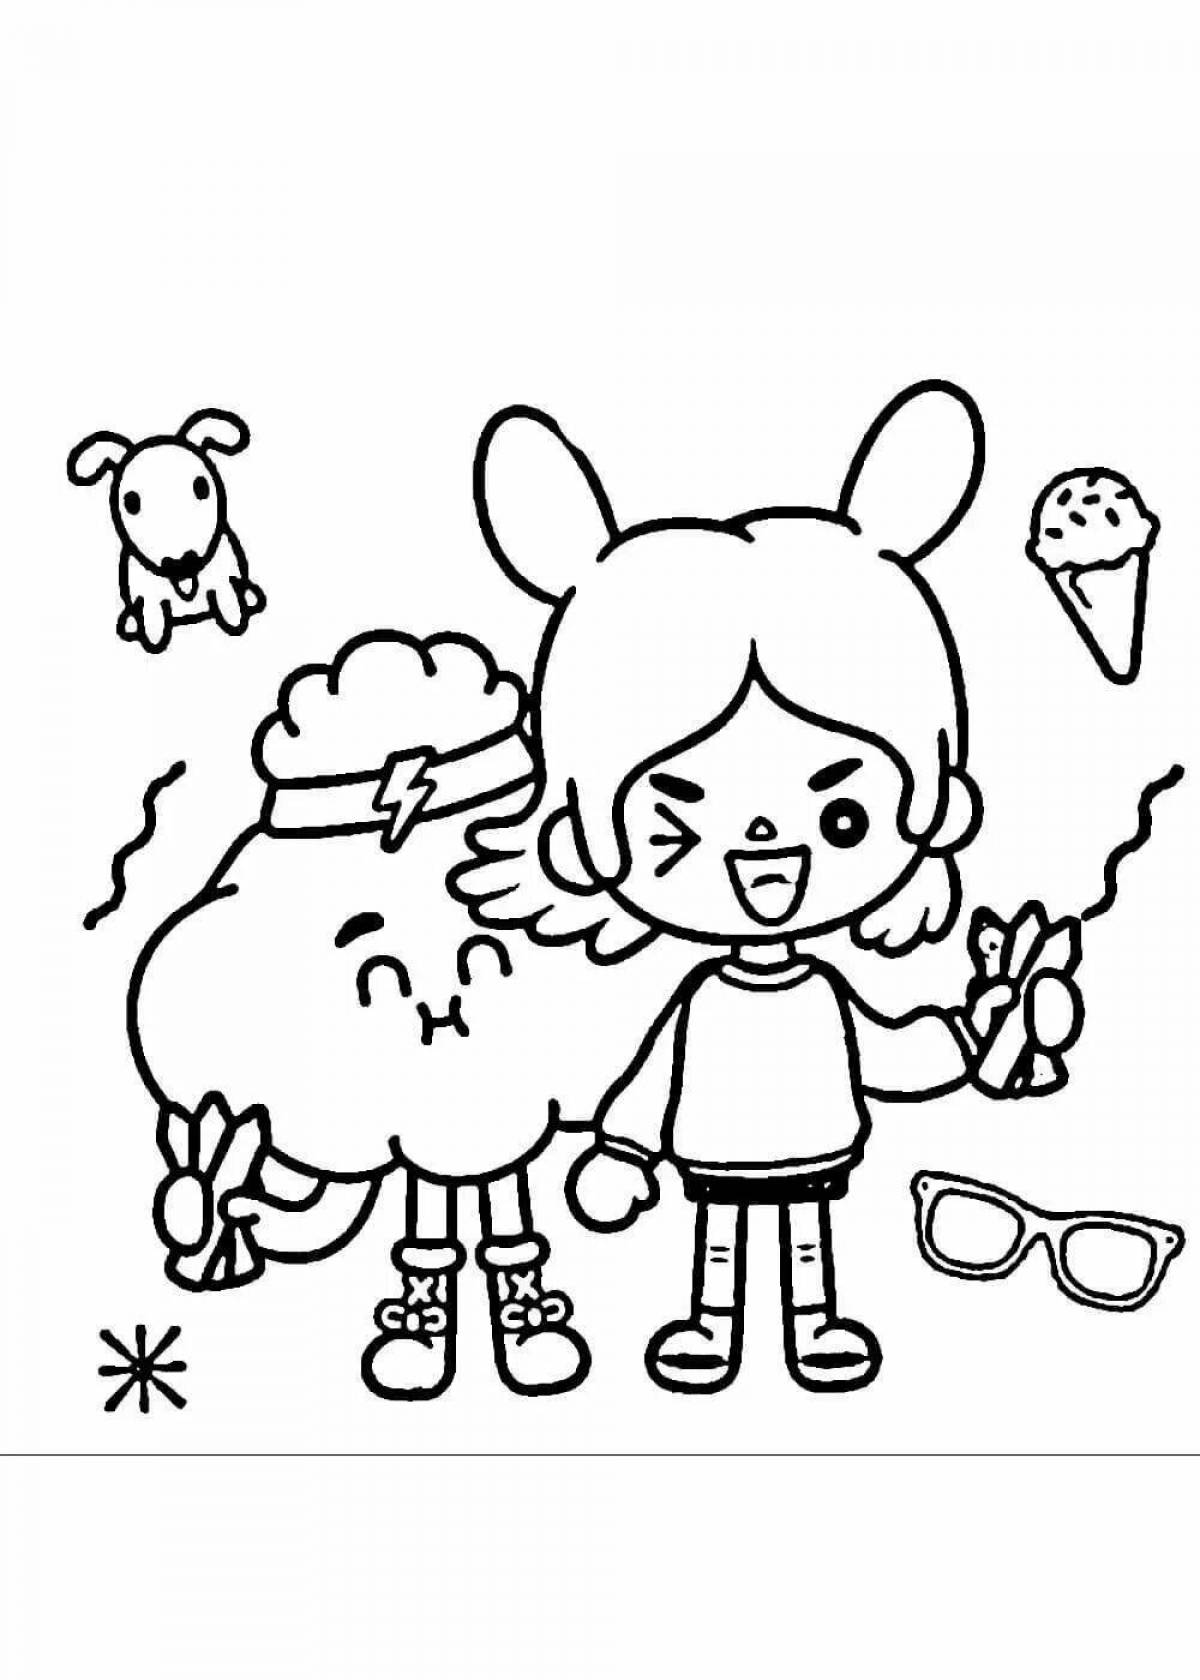 Toka boca's beautiful coloring page black and white little characters